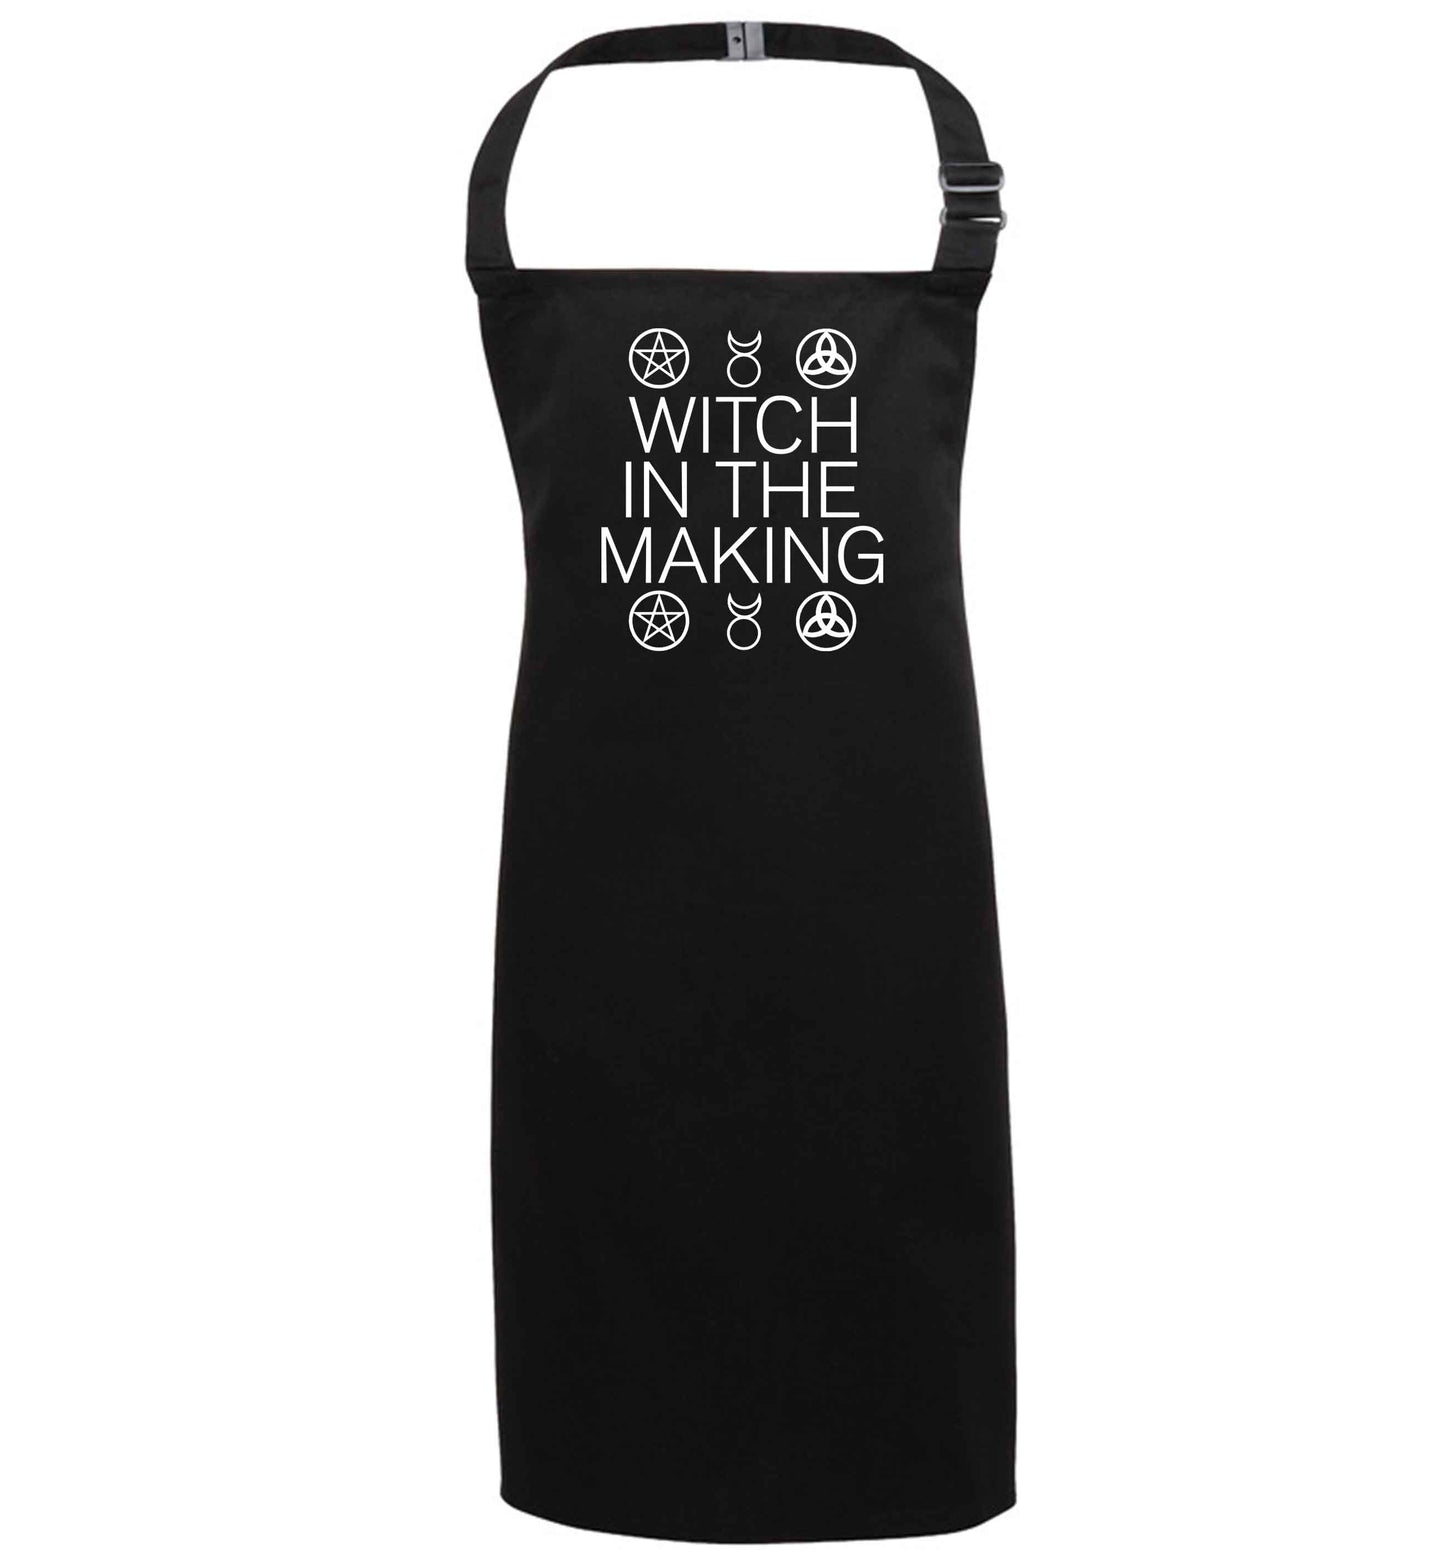 Witch in the making black apron 7-10 years